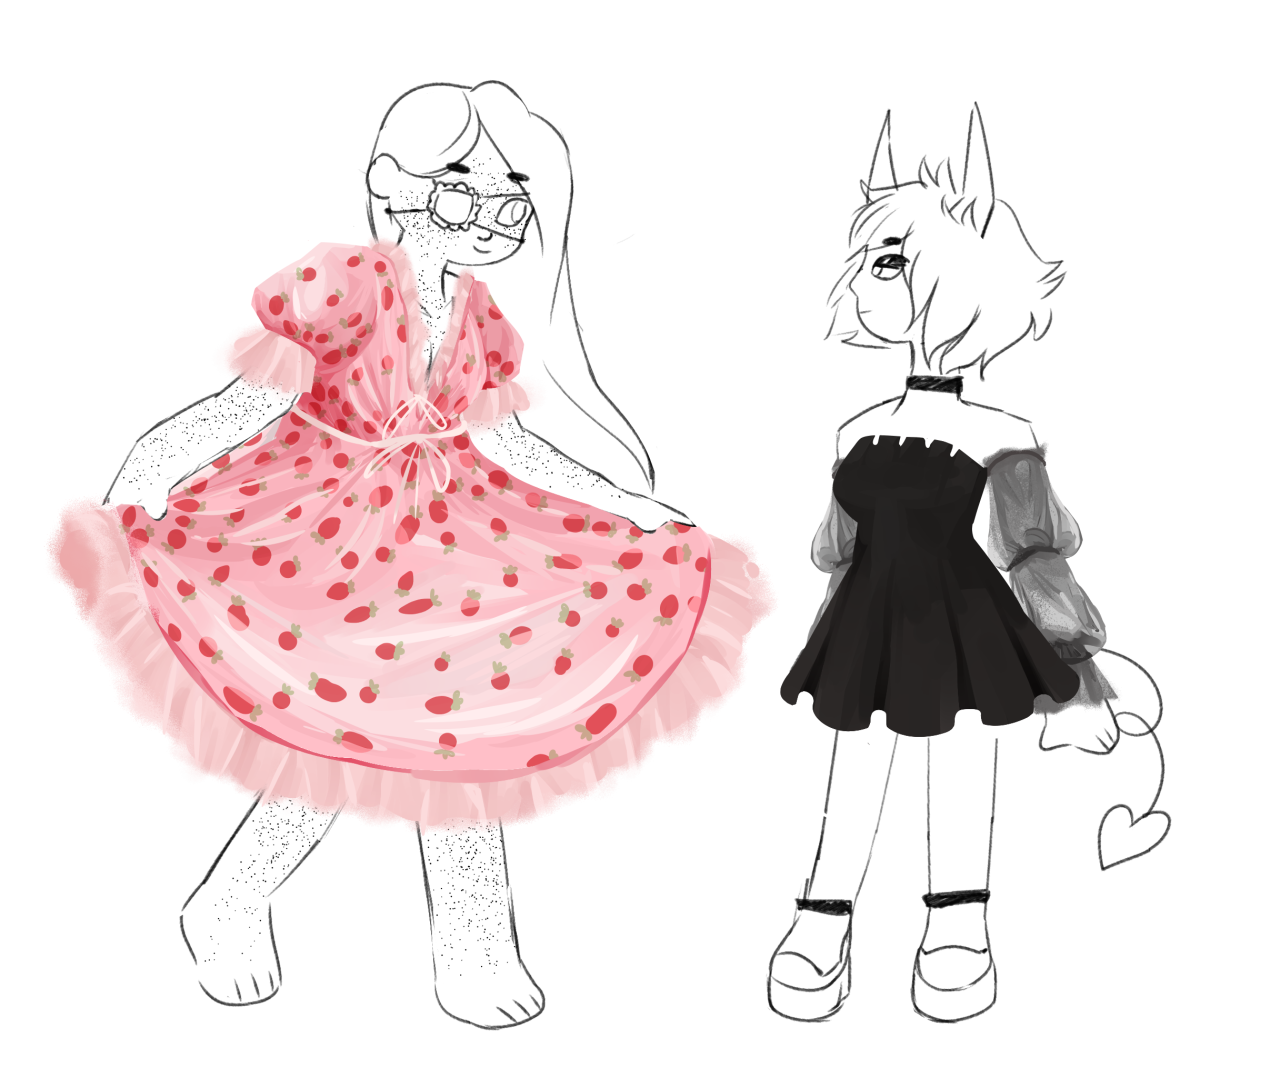 August 14, 2020. my ocs cosette and tulip in those popular internet dresses